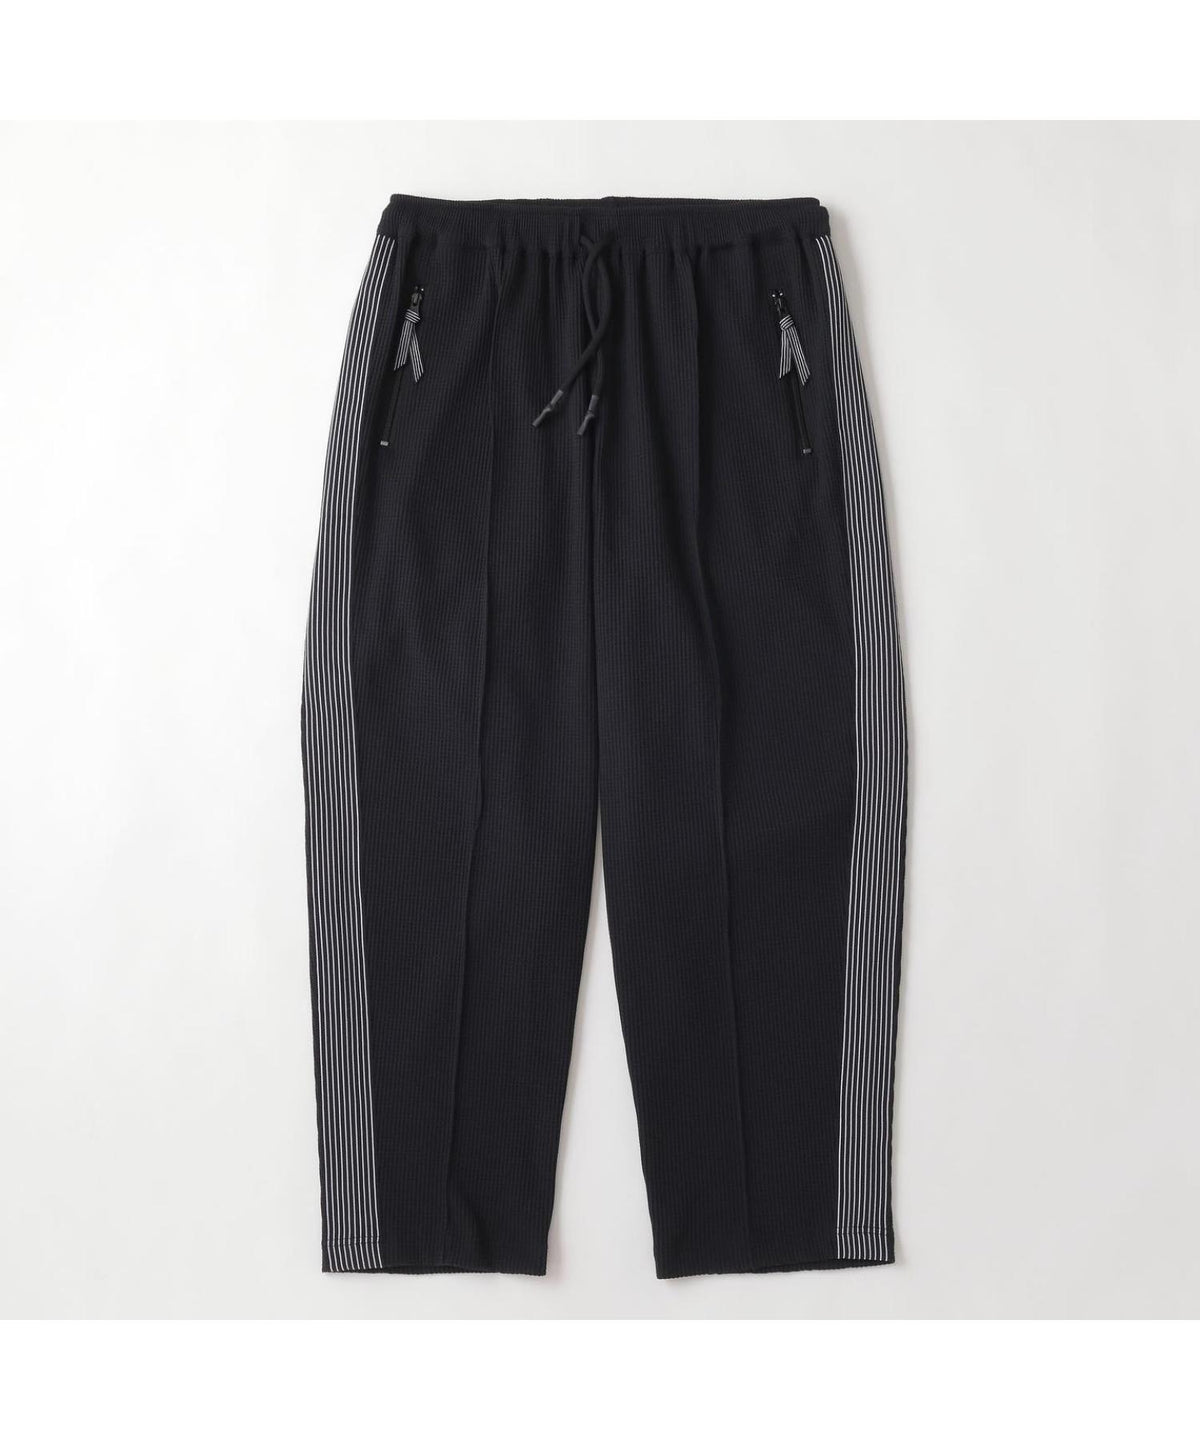 WIDE TRACK PANTS - S.F.C (Stripes For Creative) (エスエフシー 